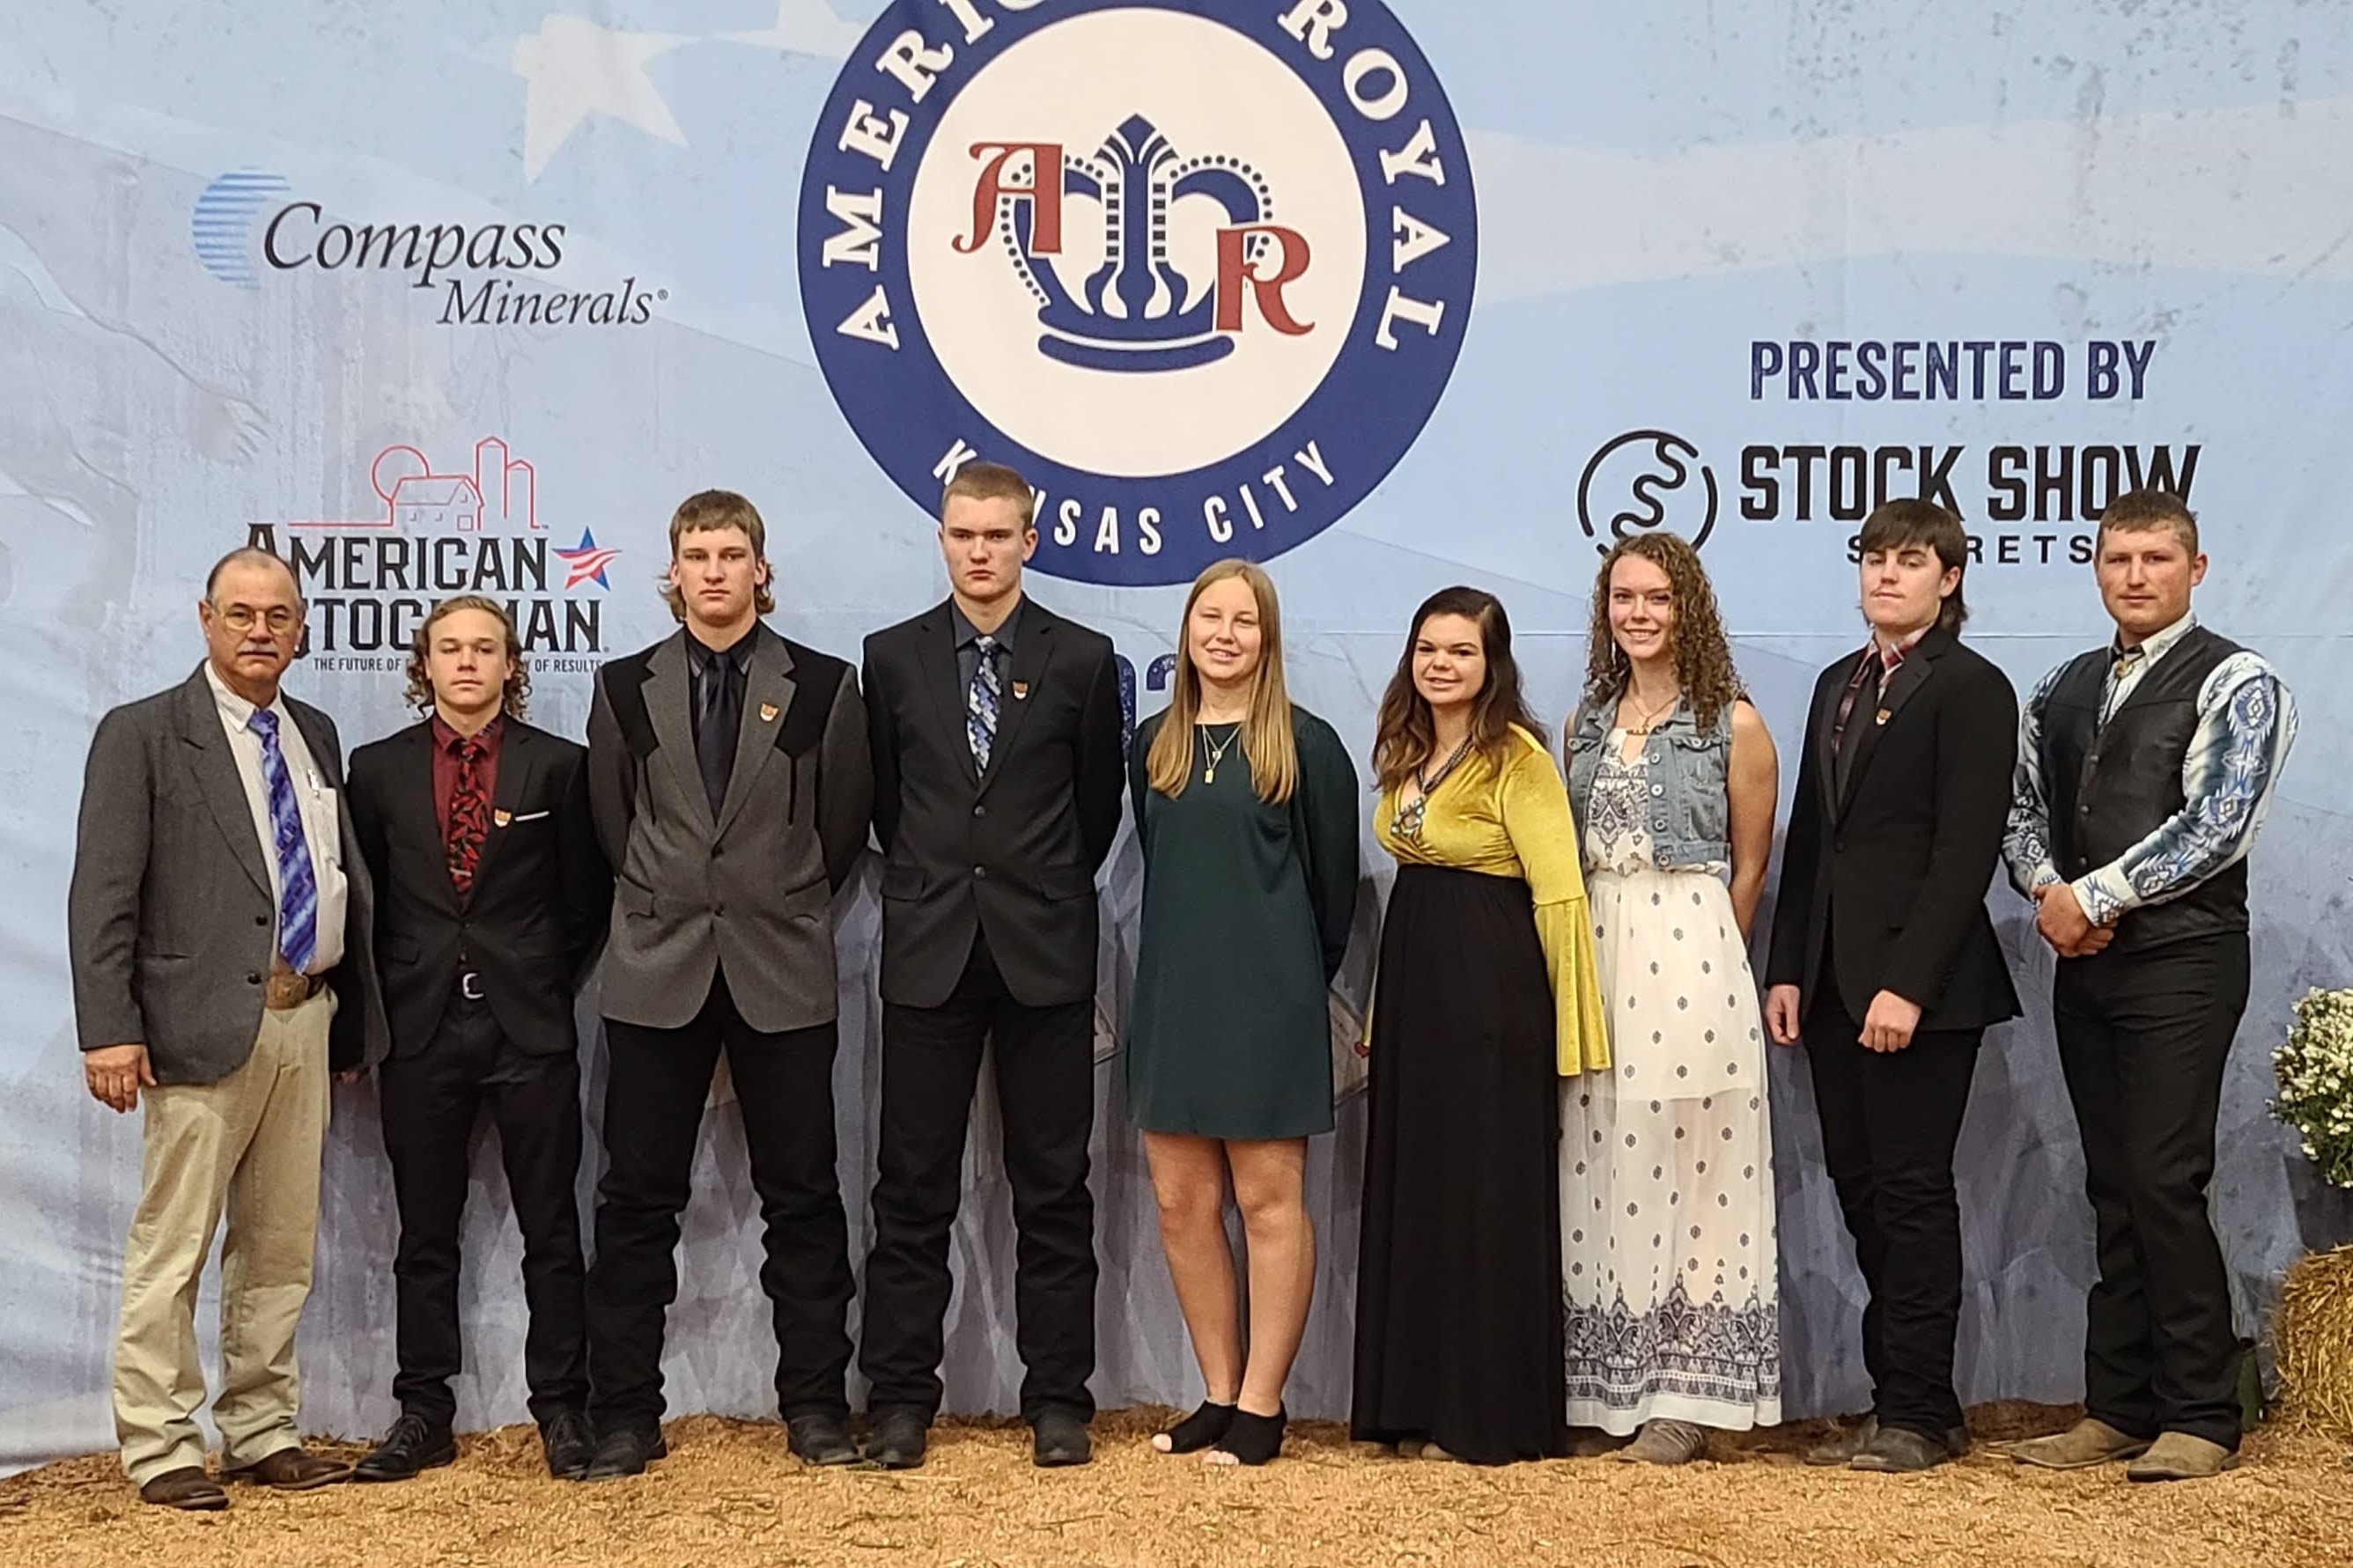 The Stark-Billings 4-H meats judging team placed sixth in the National 4-H Meats Judging Contest. Pictured left to right are Coach Kurt Froelich, NDSU Extension agent, Stark-Billings County; Justin Kathrein; Will Schmidt; Wyatt Dorner; Katie Schmidt; Taylor Downing; Quintavia Polensky; Jess Schulz and Wyatt Schulte, 4-H volunteer coach. (NDSU photo)